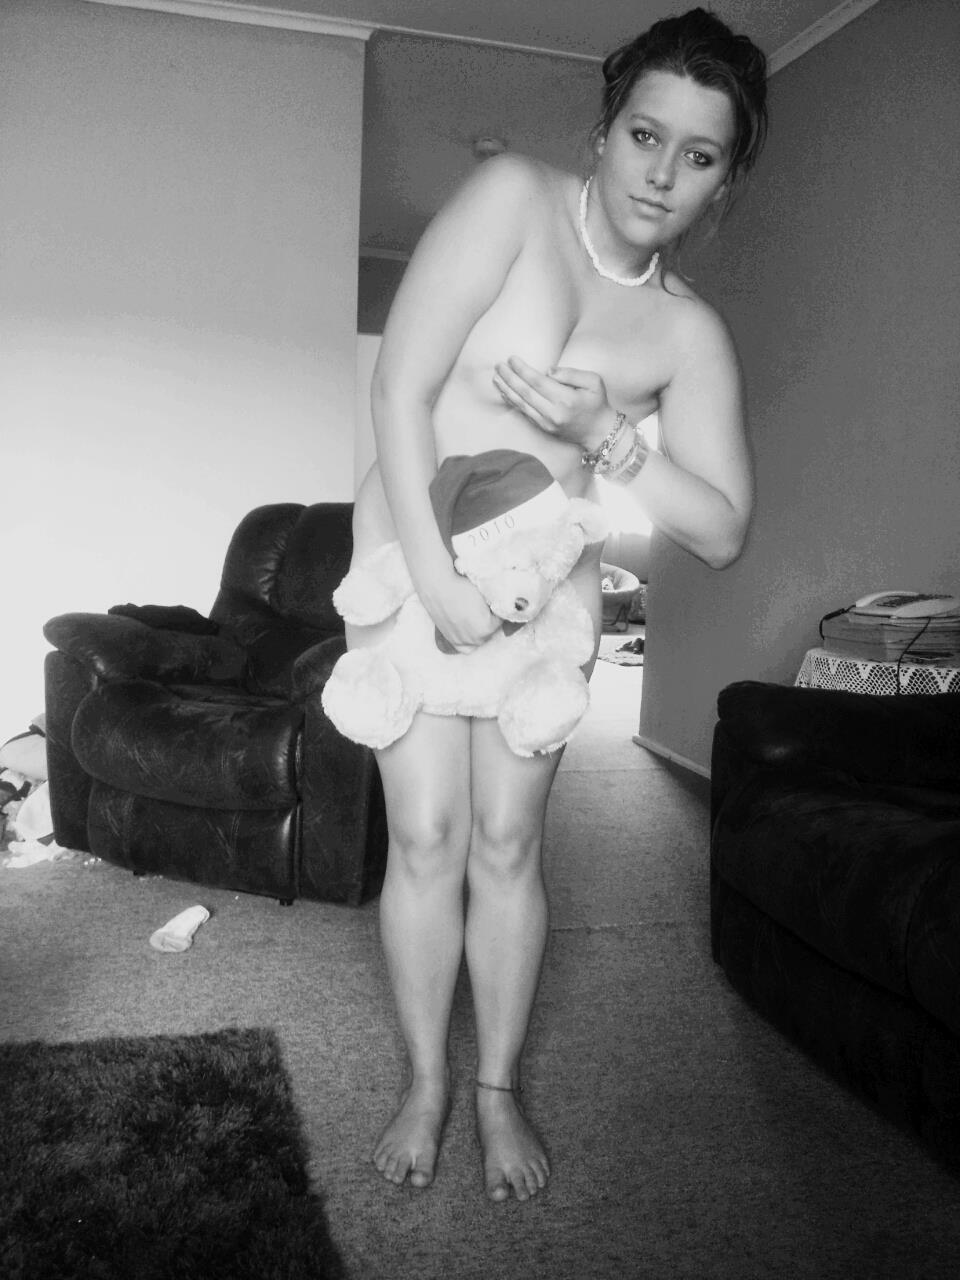 Black and white pic with a girlfriend hiding her private parts